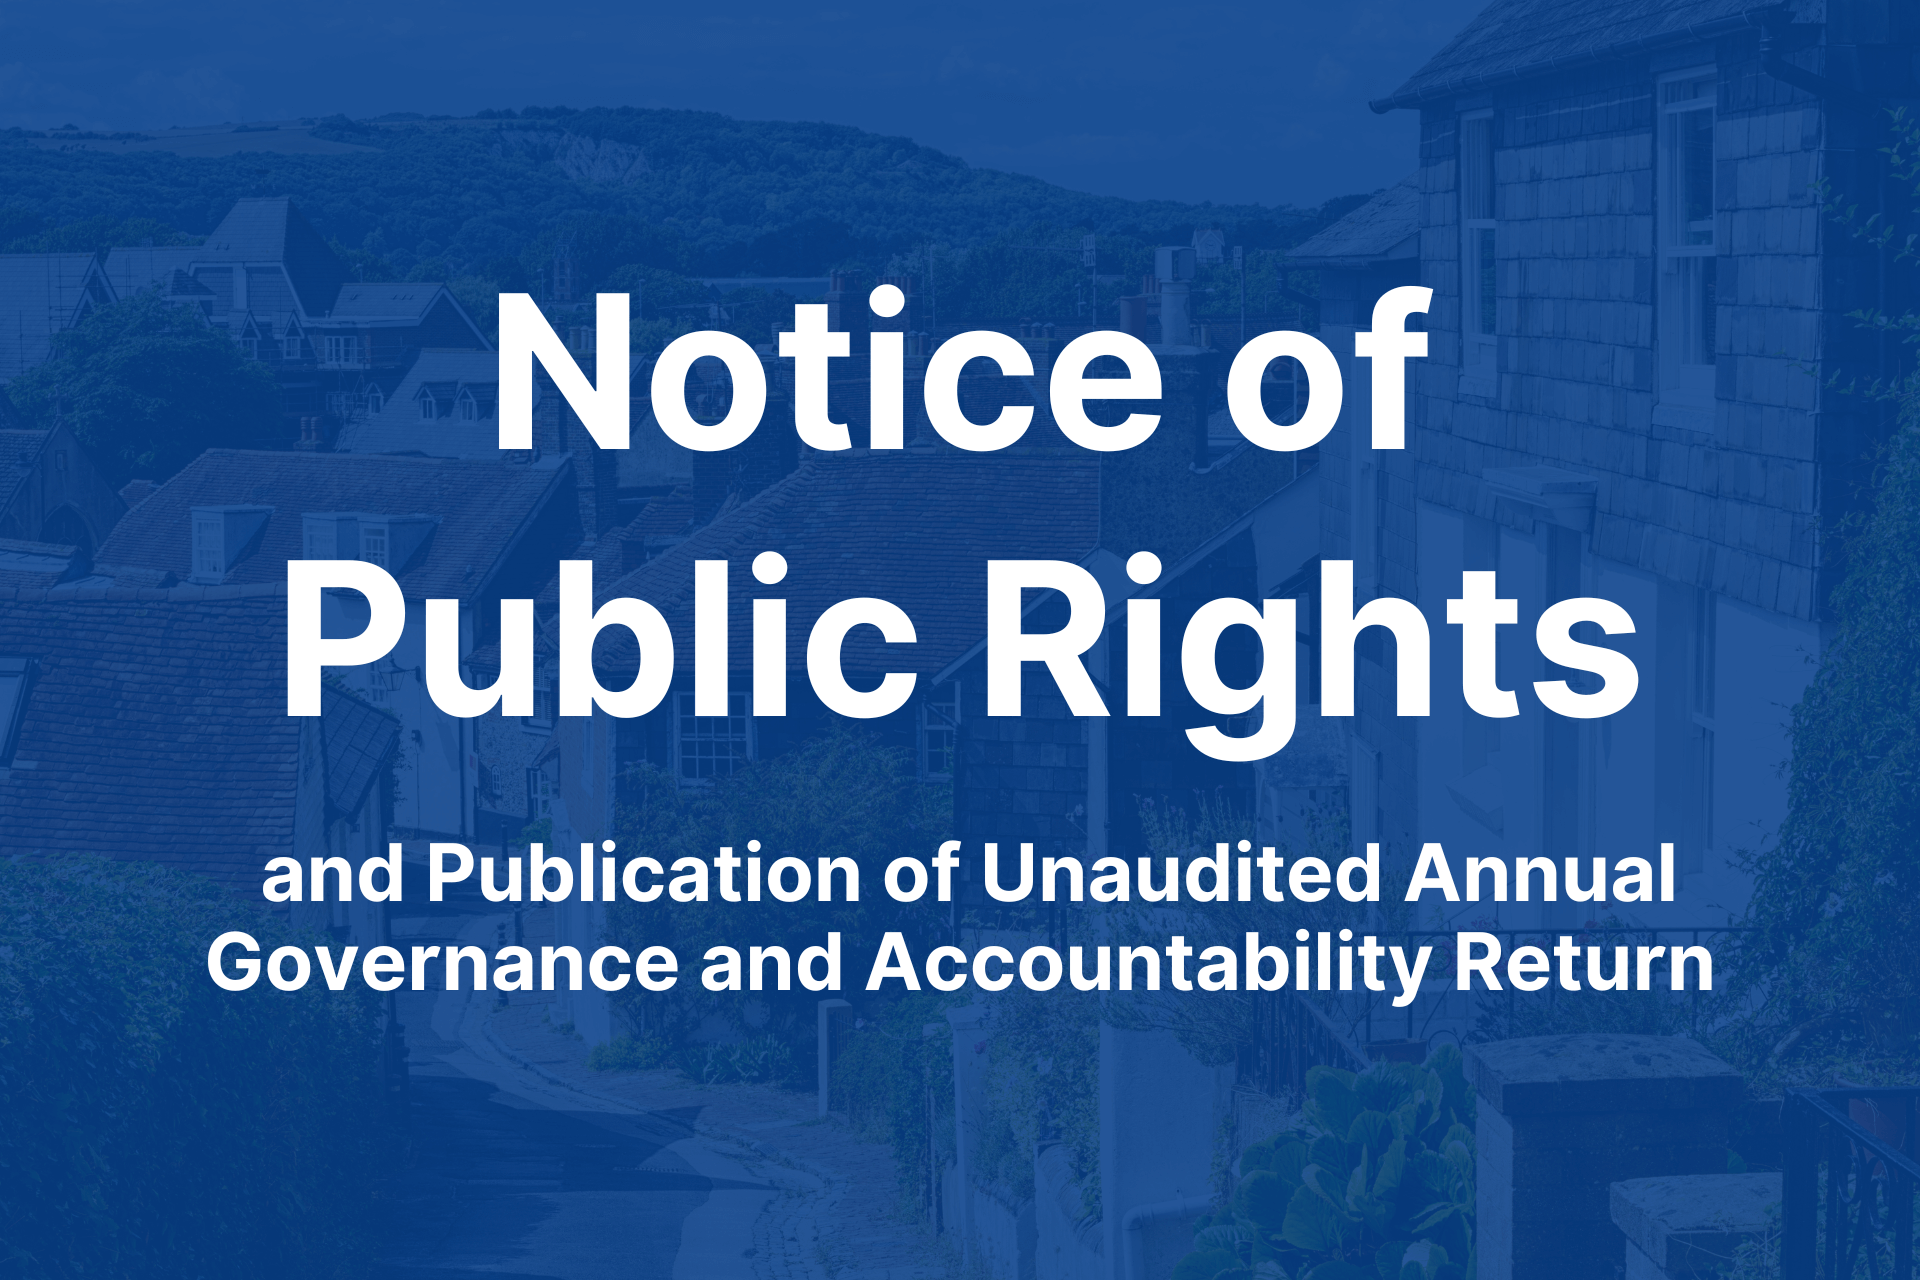 Notice Of Public Rights And Publication Of Unaudited Annual Governance & Accountability Return